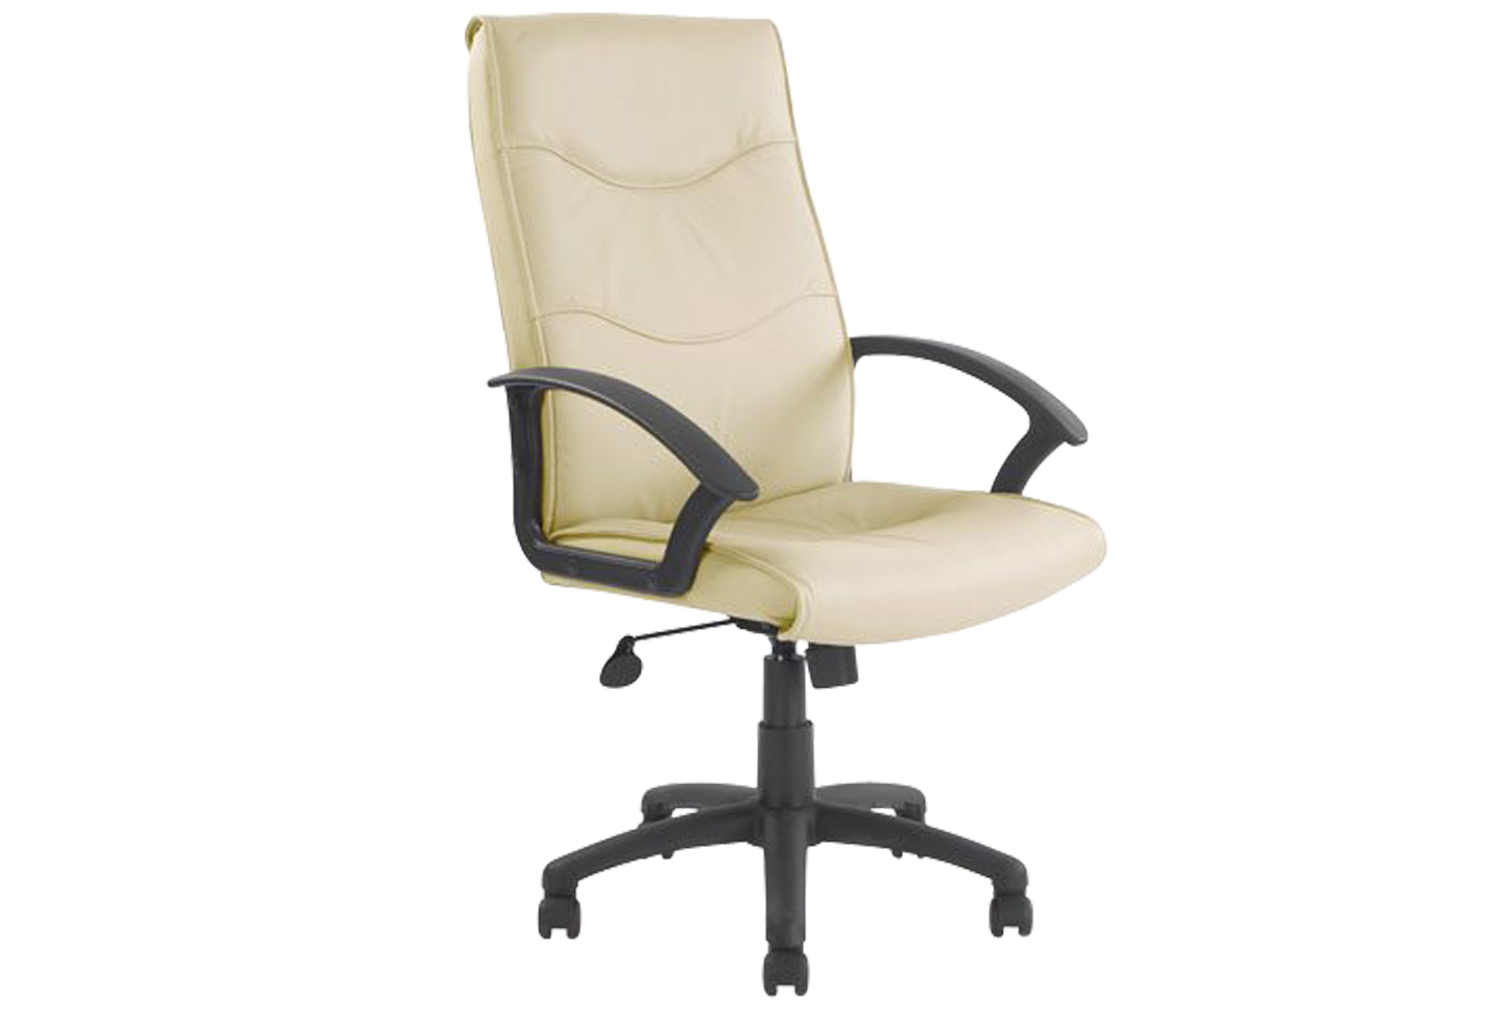 Corbett High Back Leather Faced Office Chair (Cream), Express Delivery